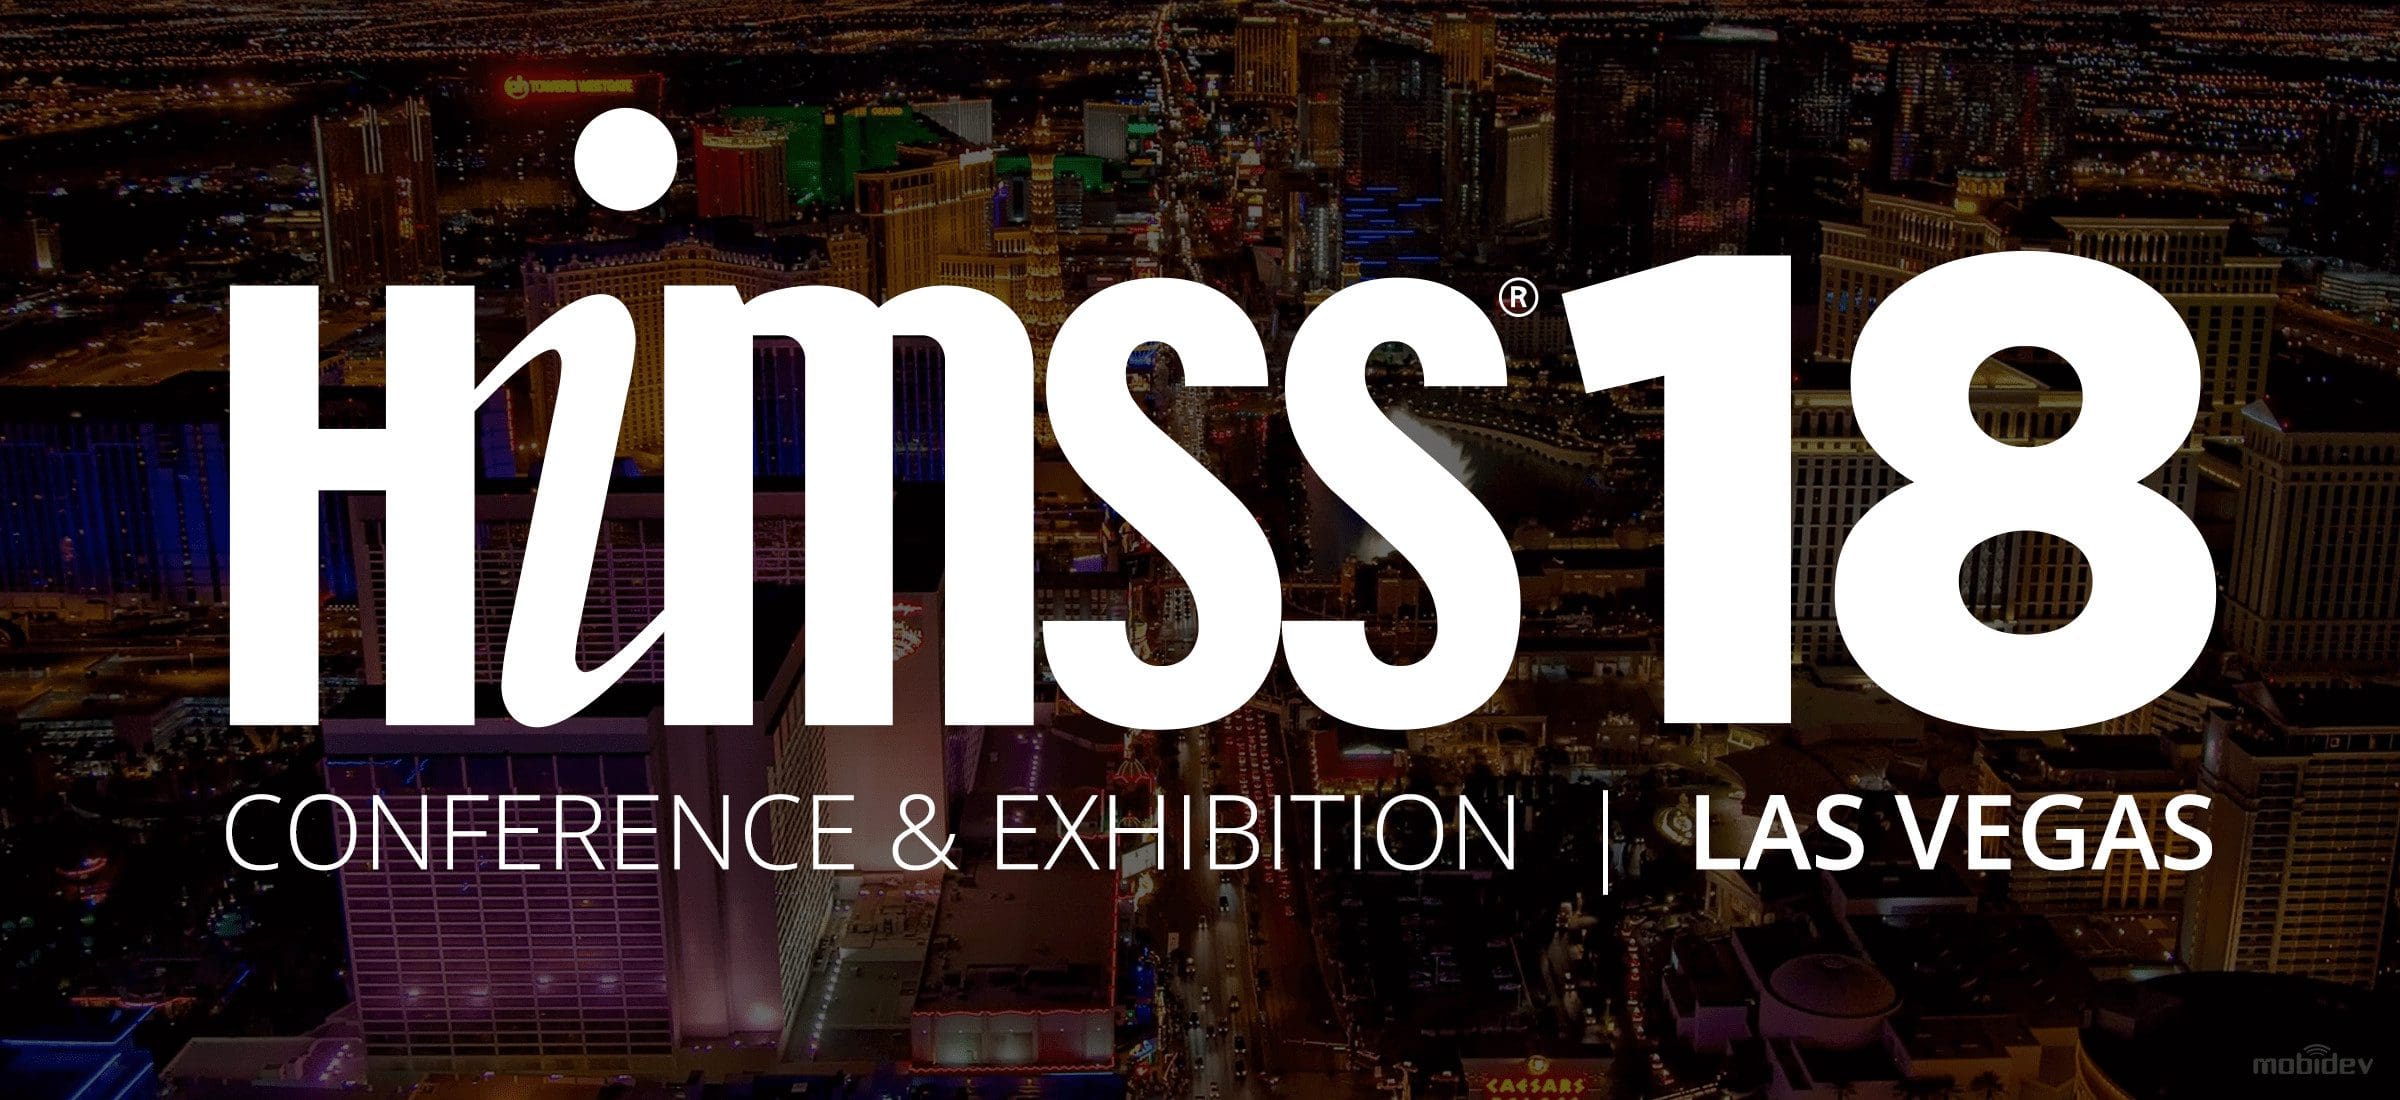 5 Trends We Observed At HIMSS 2018